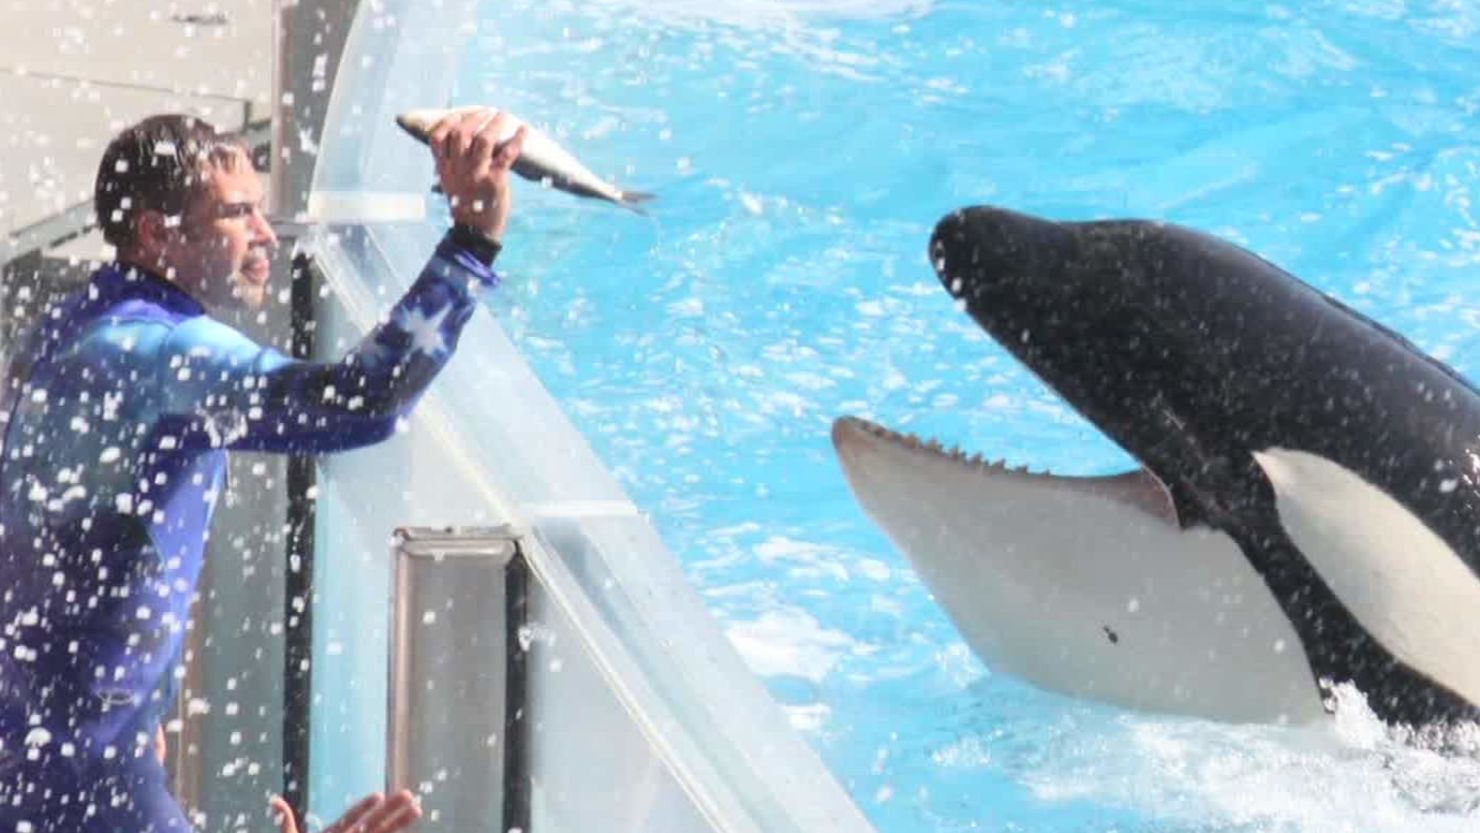 SeaWorld admitted Thursday that its employees posed as animal rights activists with the intent of spying on protesters. The company has been under fire since the 2013 documentary "Blackfish" shed harsh light on the conditions in which its killer whales are raised. 